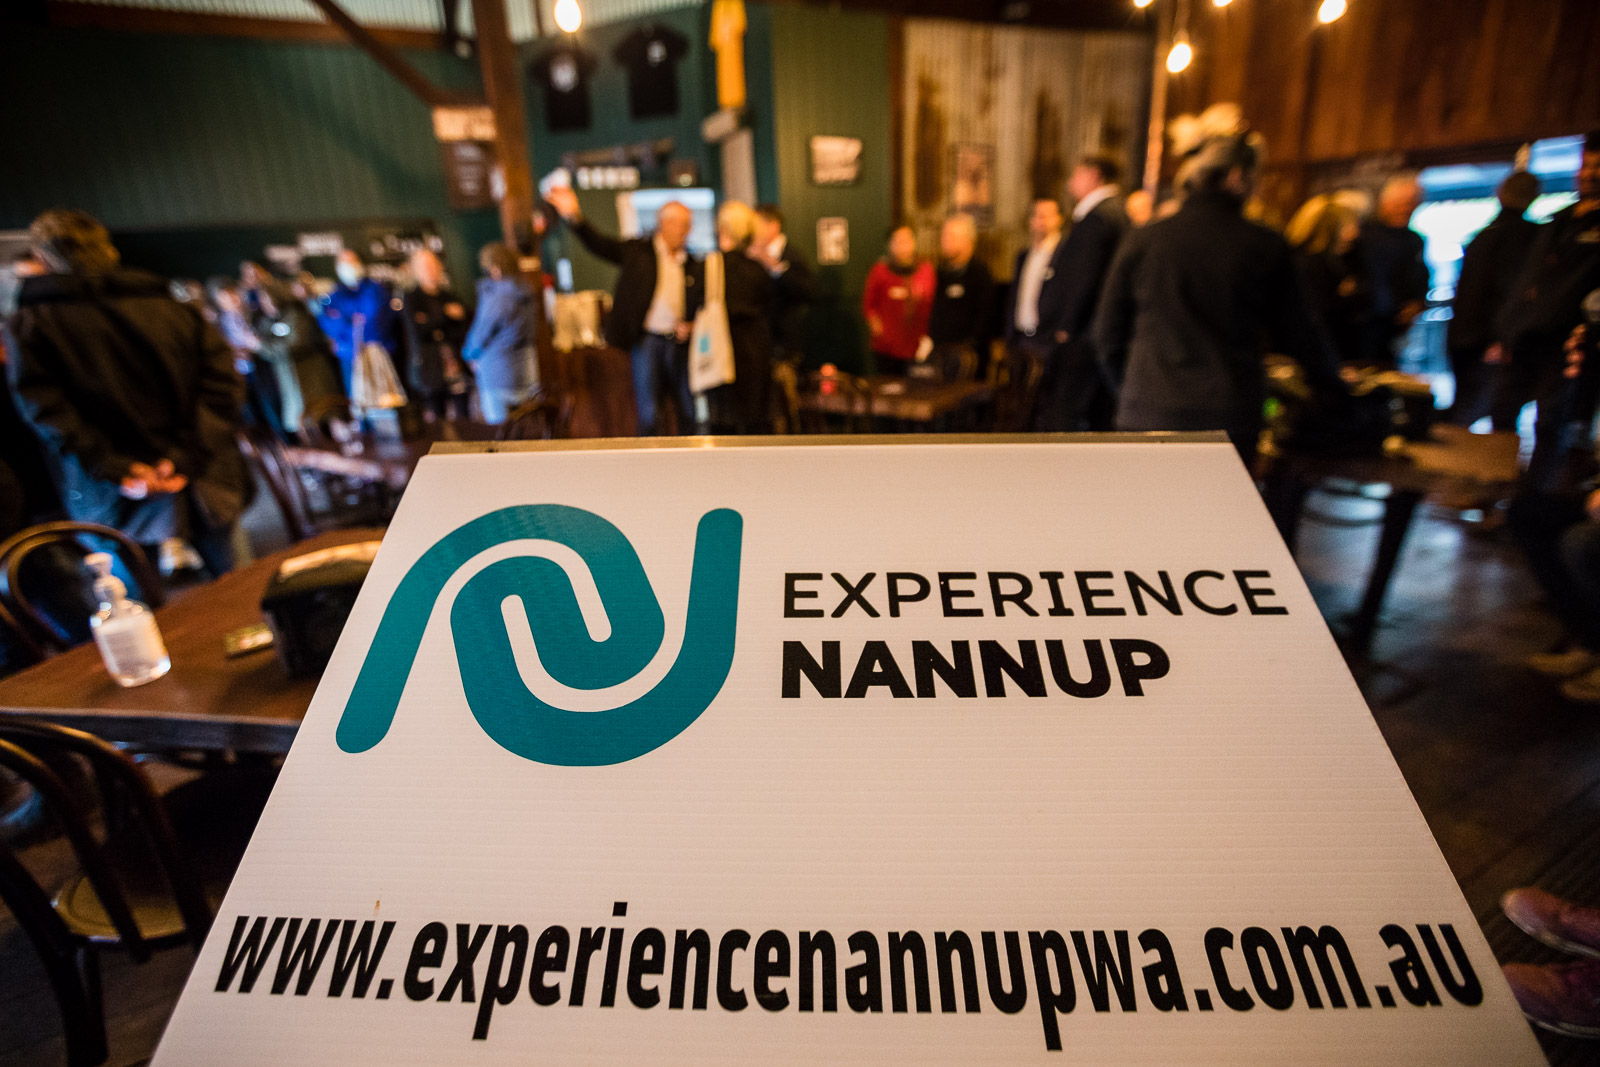 Experience Nannup, the new mobile visitor information